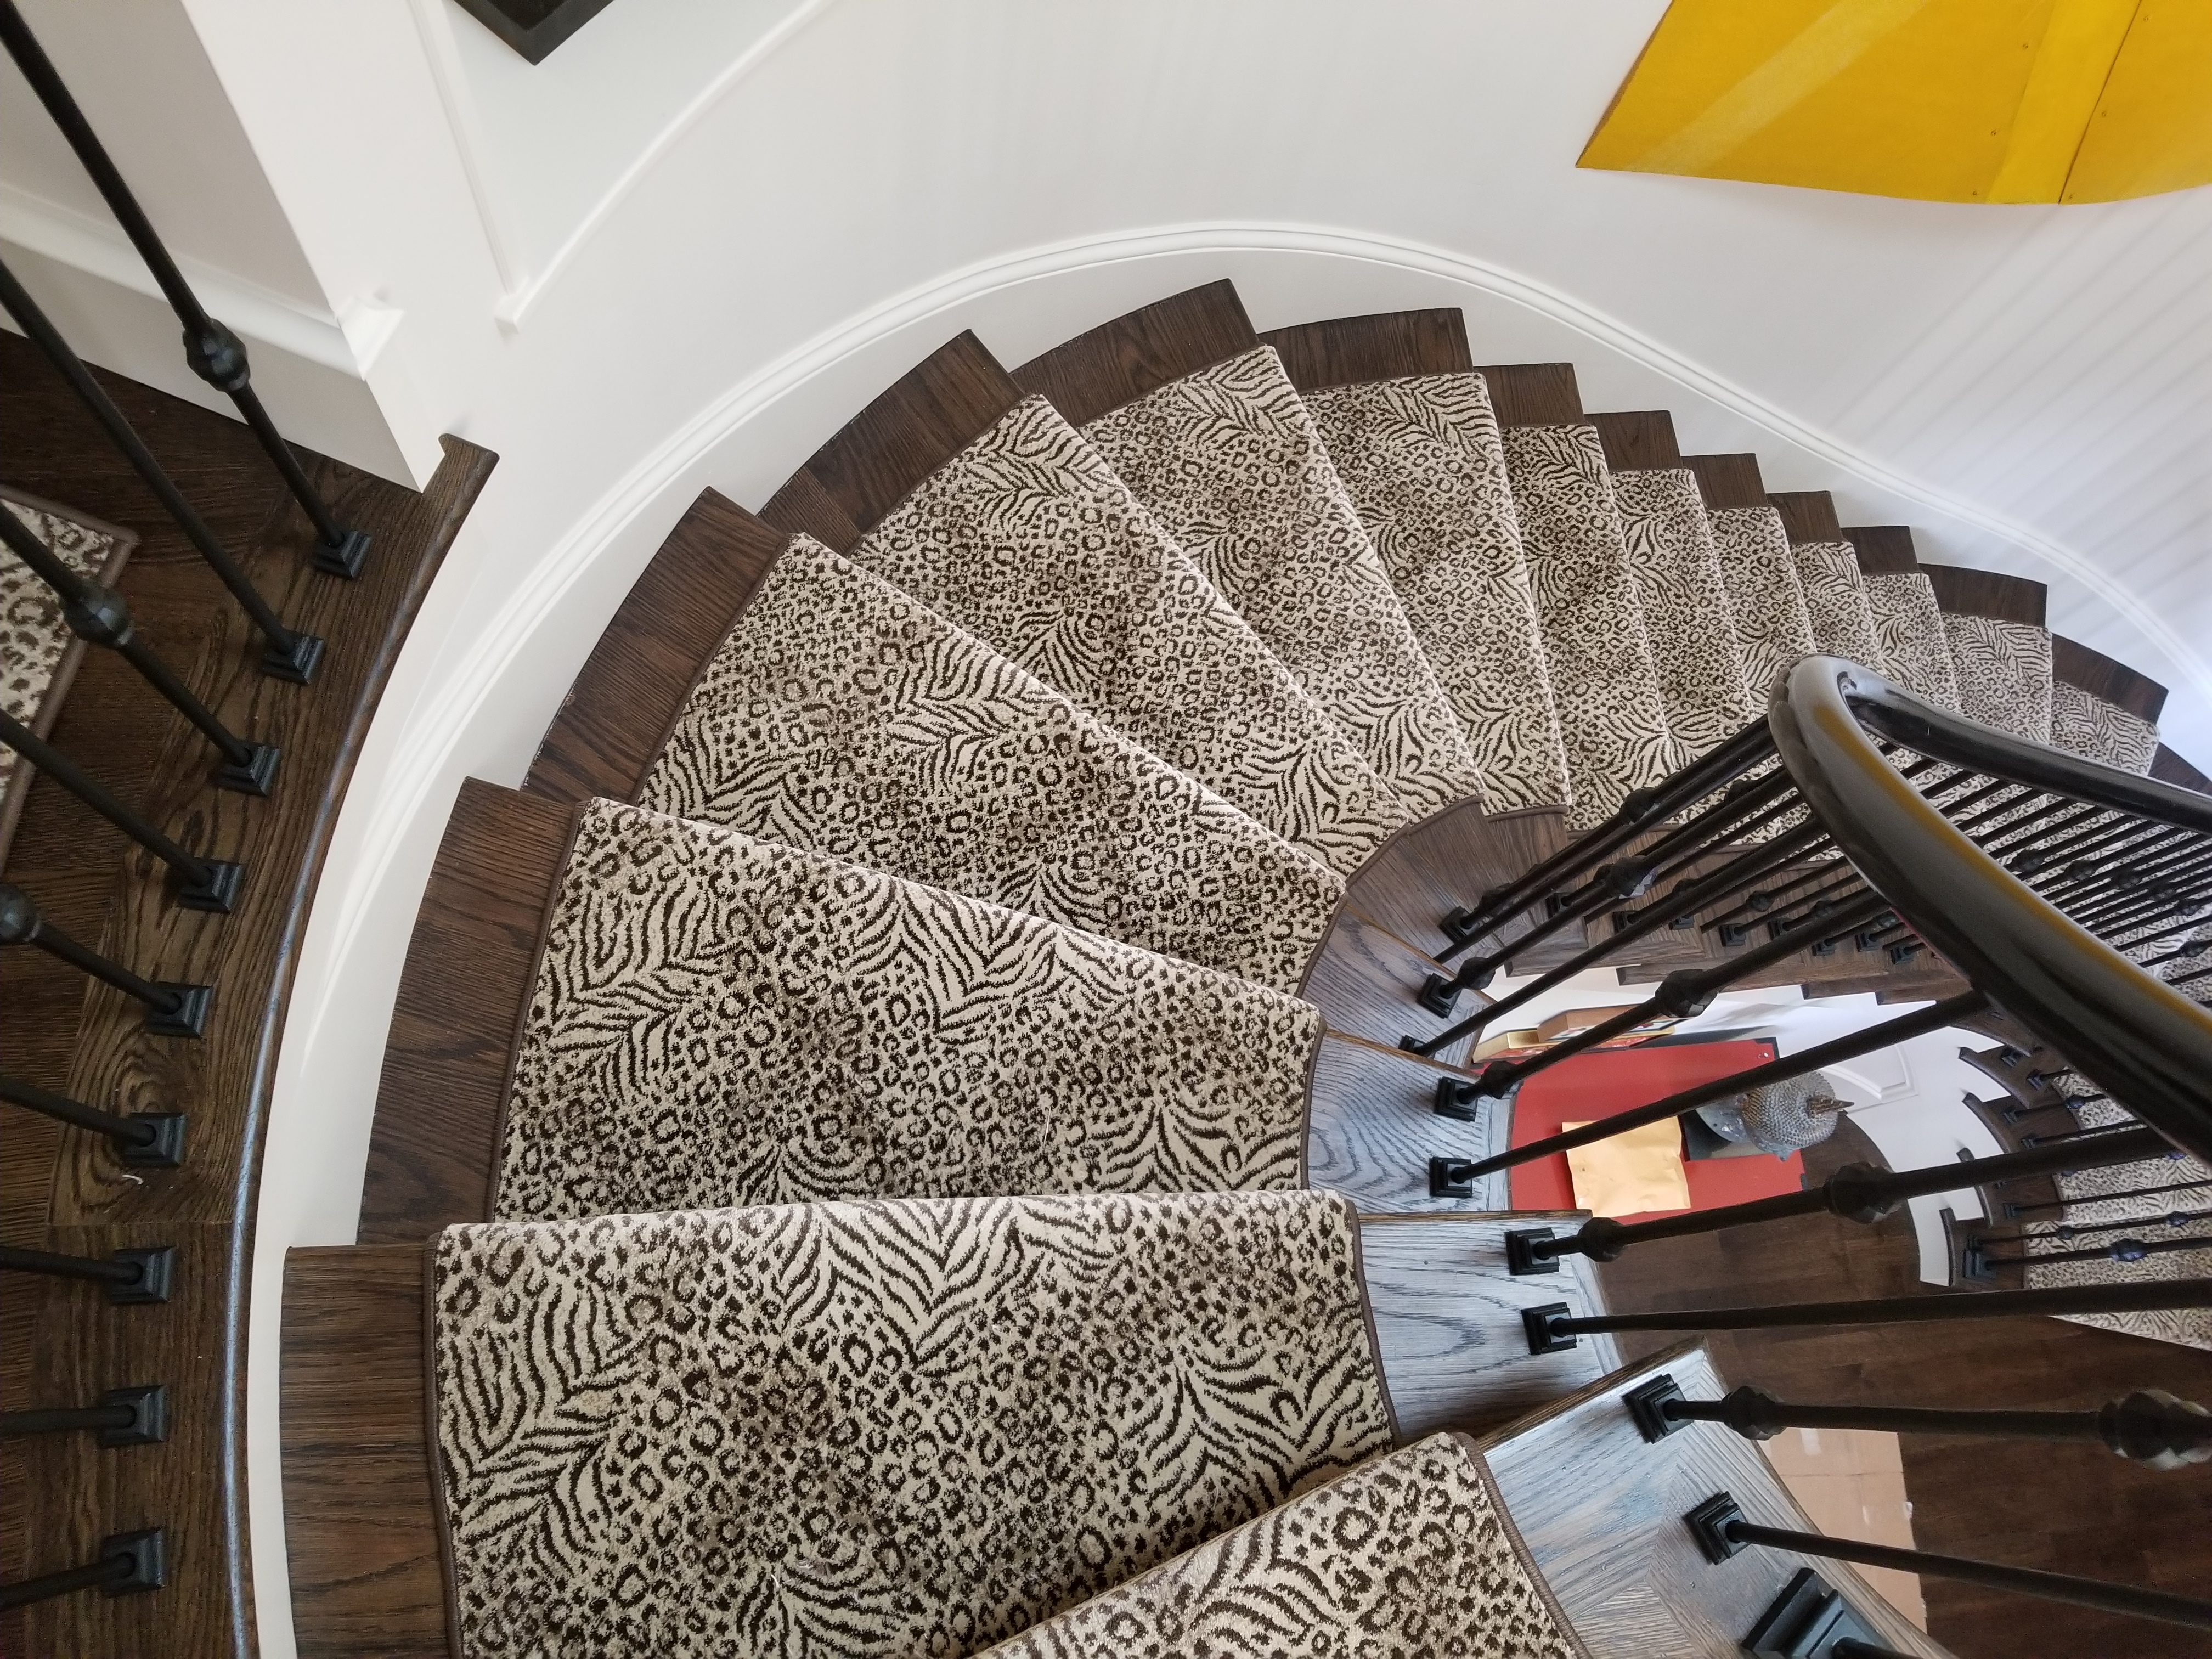 A spiral staircase with animal print carpet and wood steps.